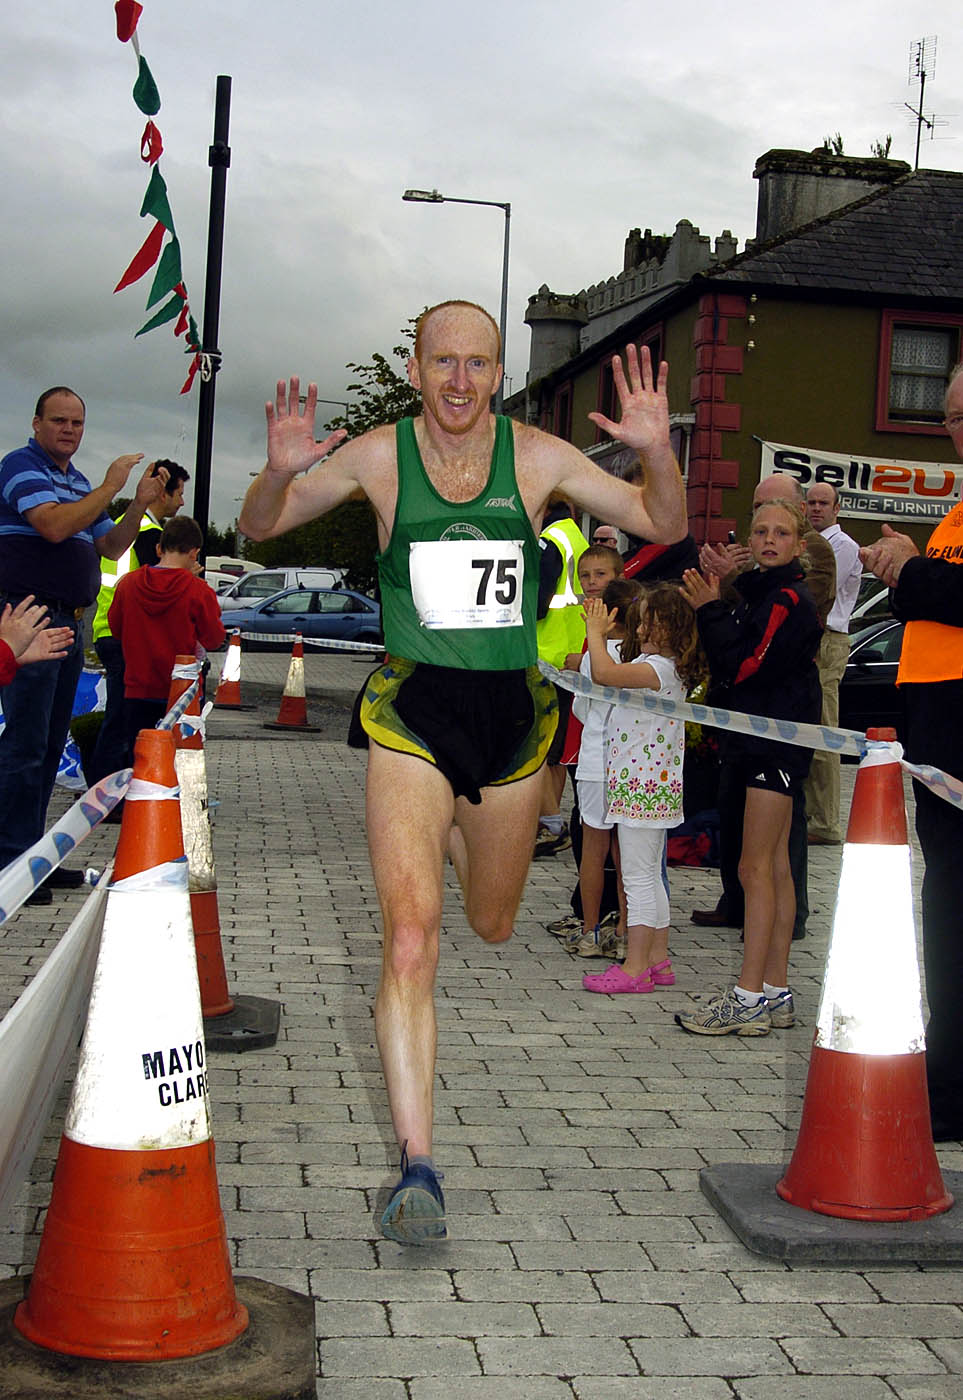 Balla 13th Annual 10K Road Race 2007, Robert Malseed 1st over the finishing line Photo  Ken Wright Photography 2007. 